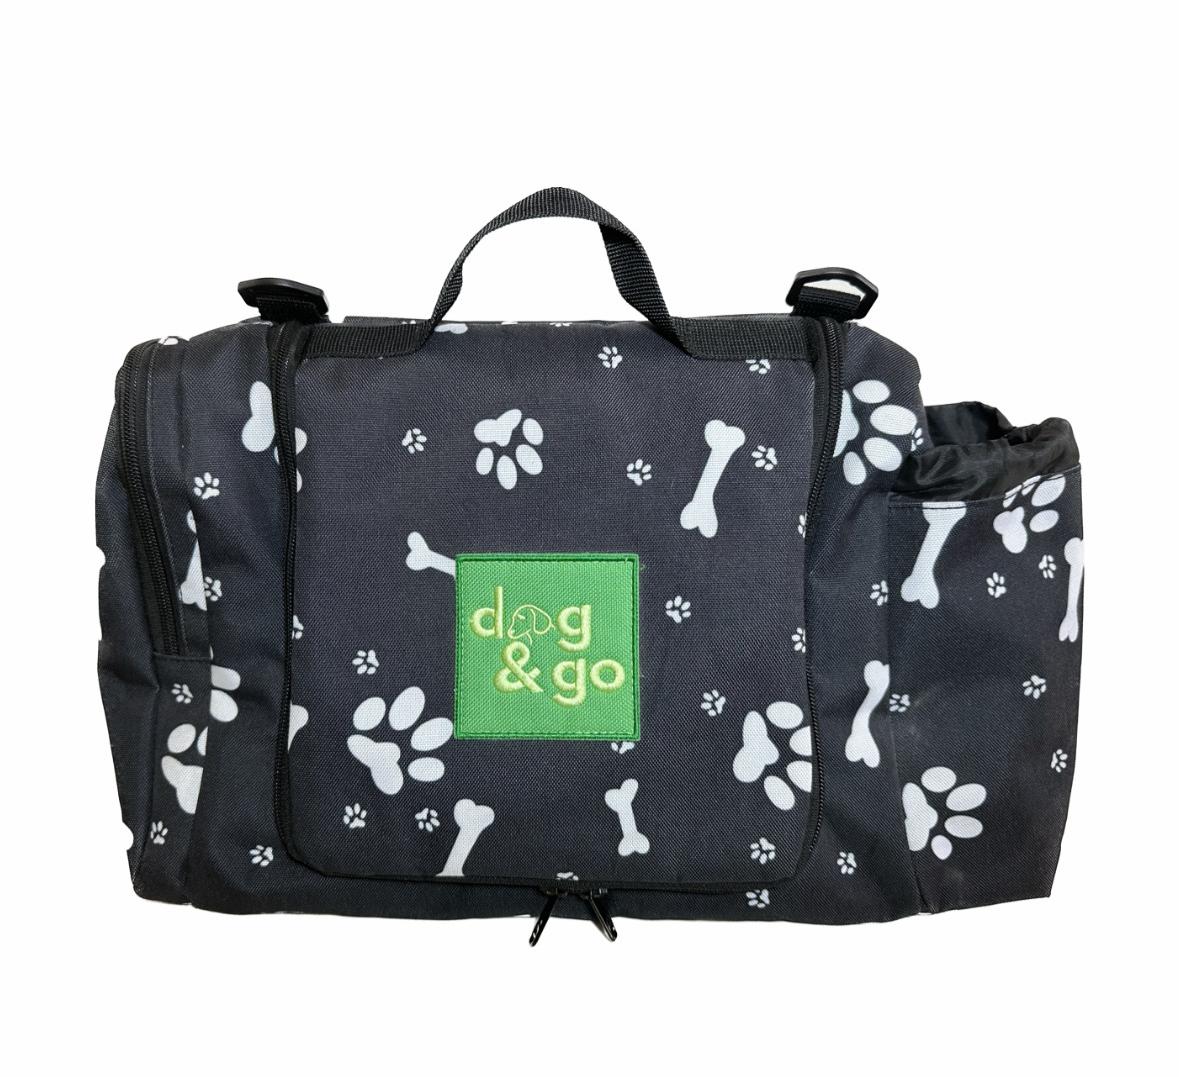 Dog&Go® ALL-IN-ONE TRAVEL KIT